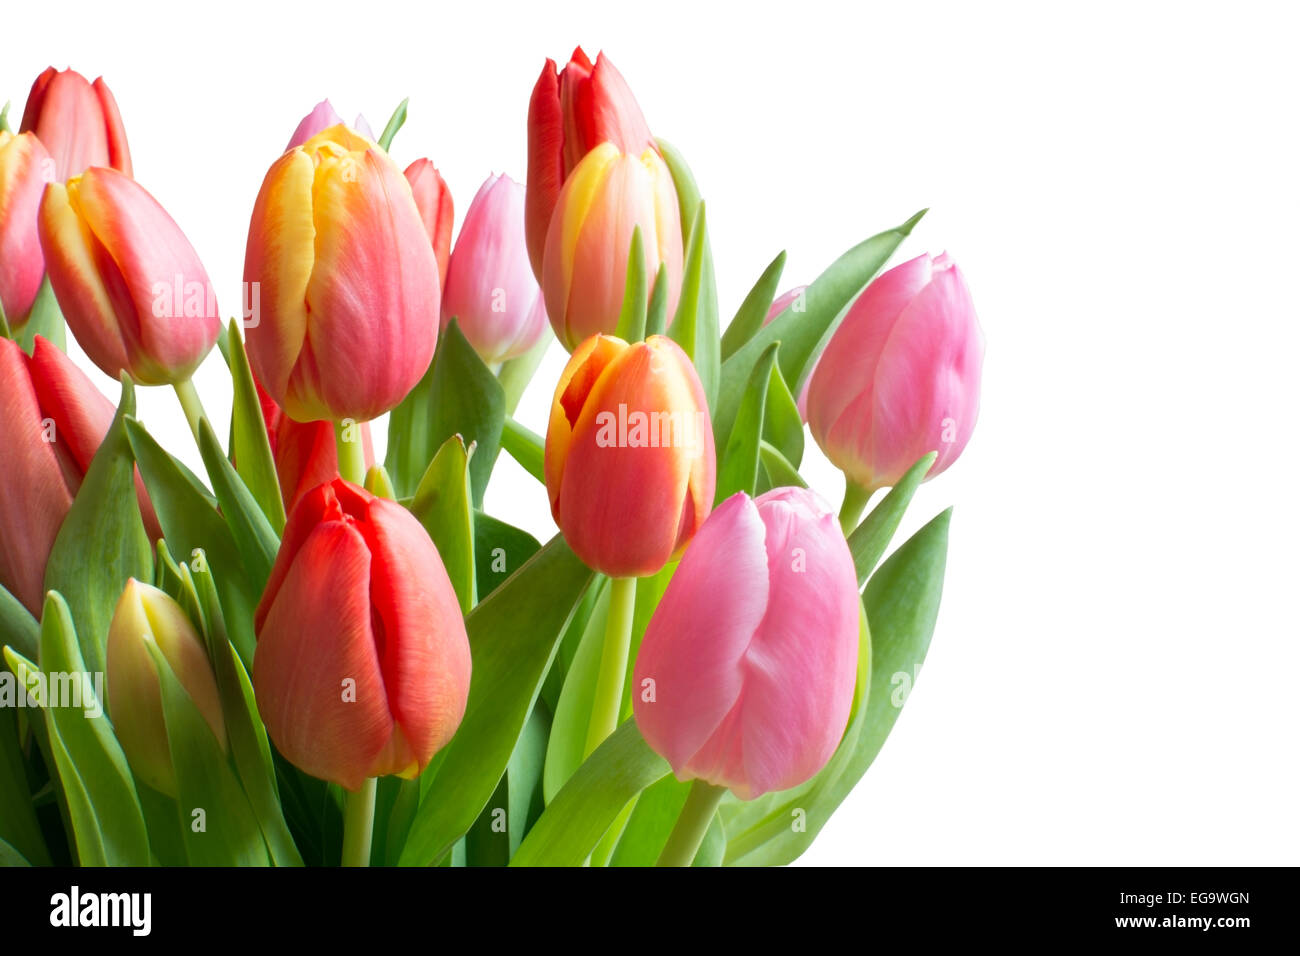 Colorful tulips isolated on white. Bouquet of tulips in red, yellow, pink with stems and leaves in green, isolated on white. Stock Photo